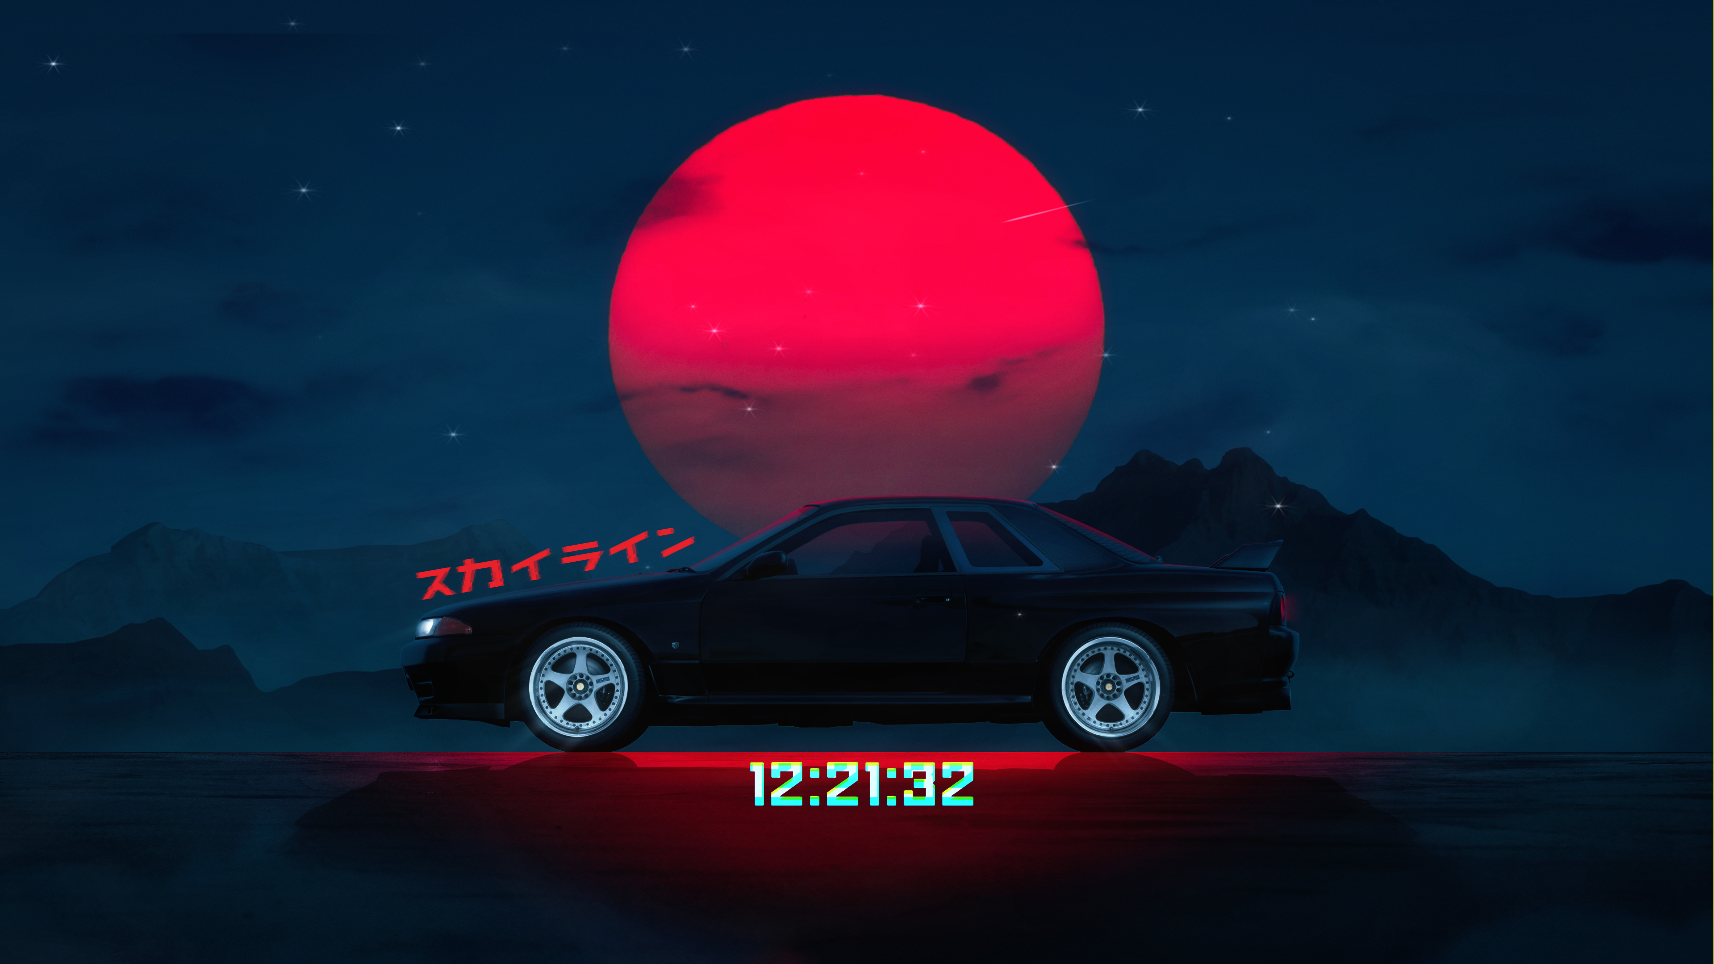 R32 GTR I Just Finished Really Simple And My First Created Wallpaper On Wallpaper Engine (background Created By U Acoolrocket ) (workshop Link In Comments)